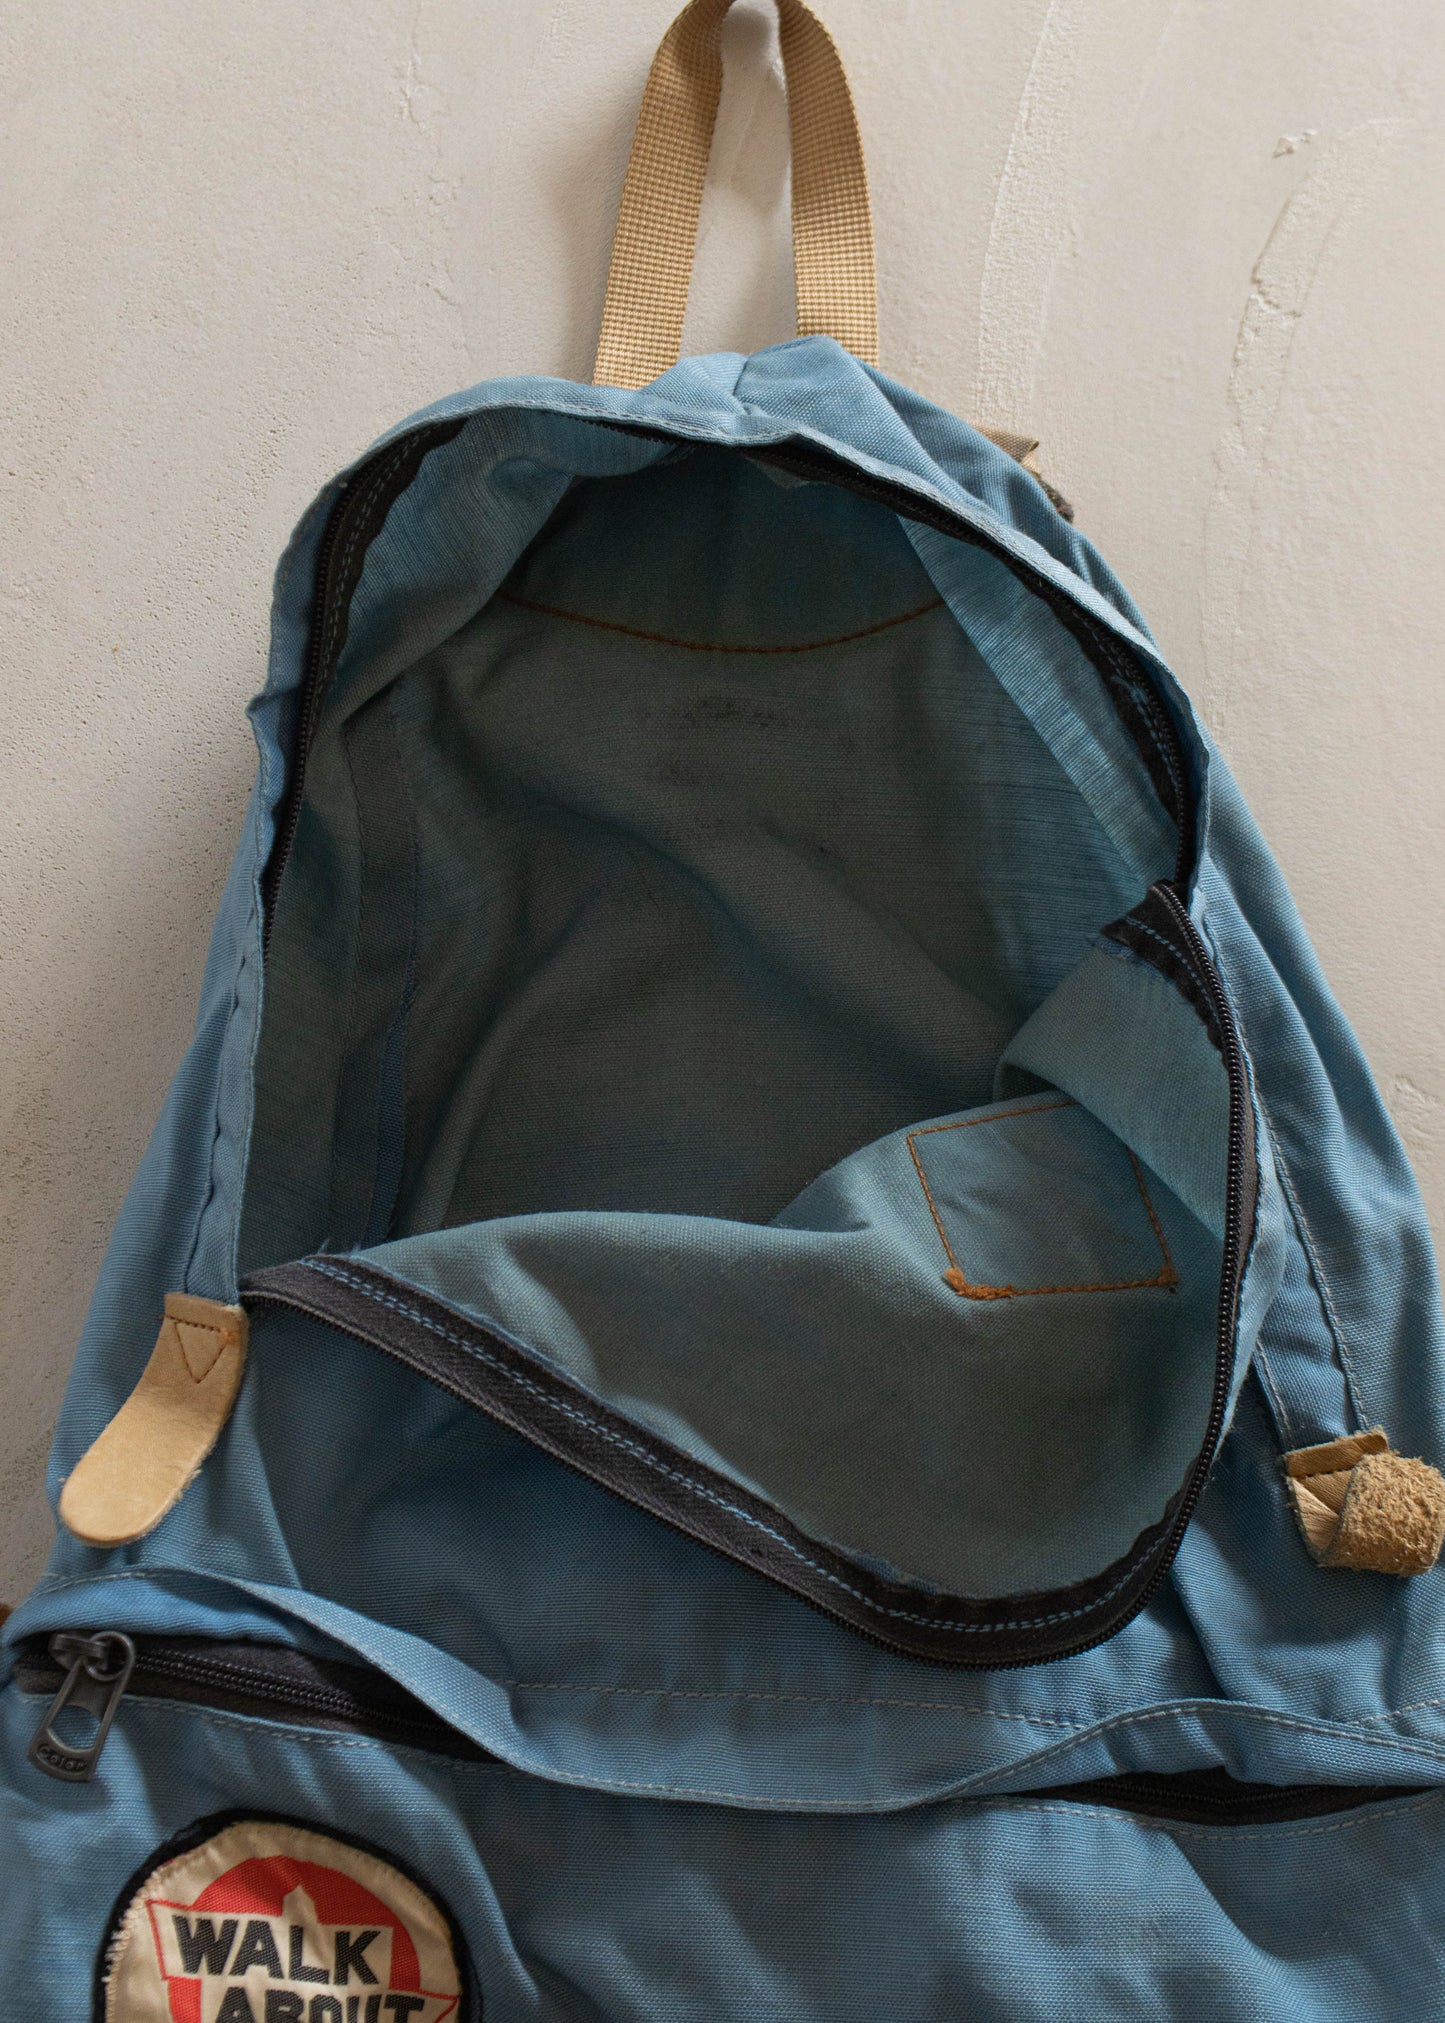 1980s Walkabout Backpack